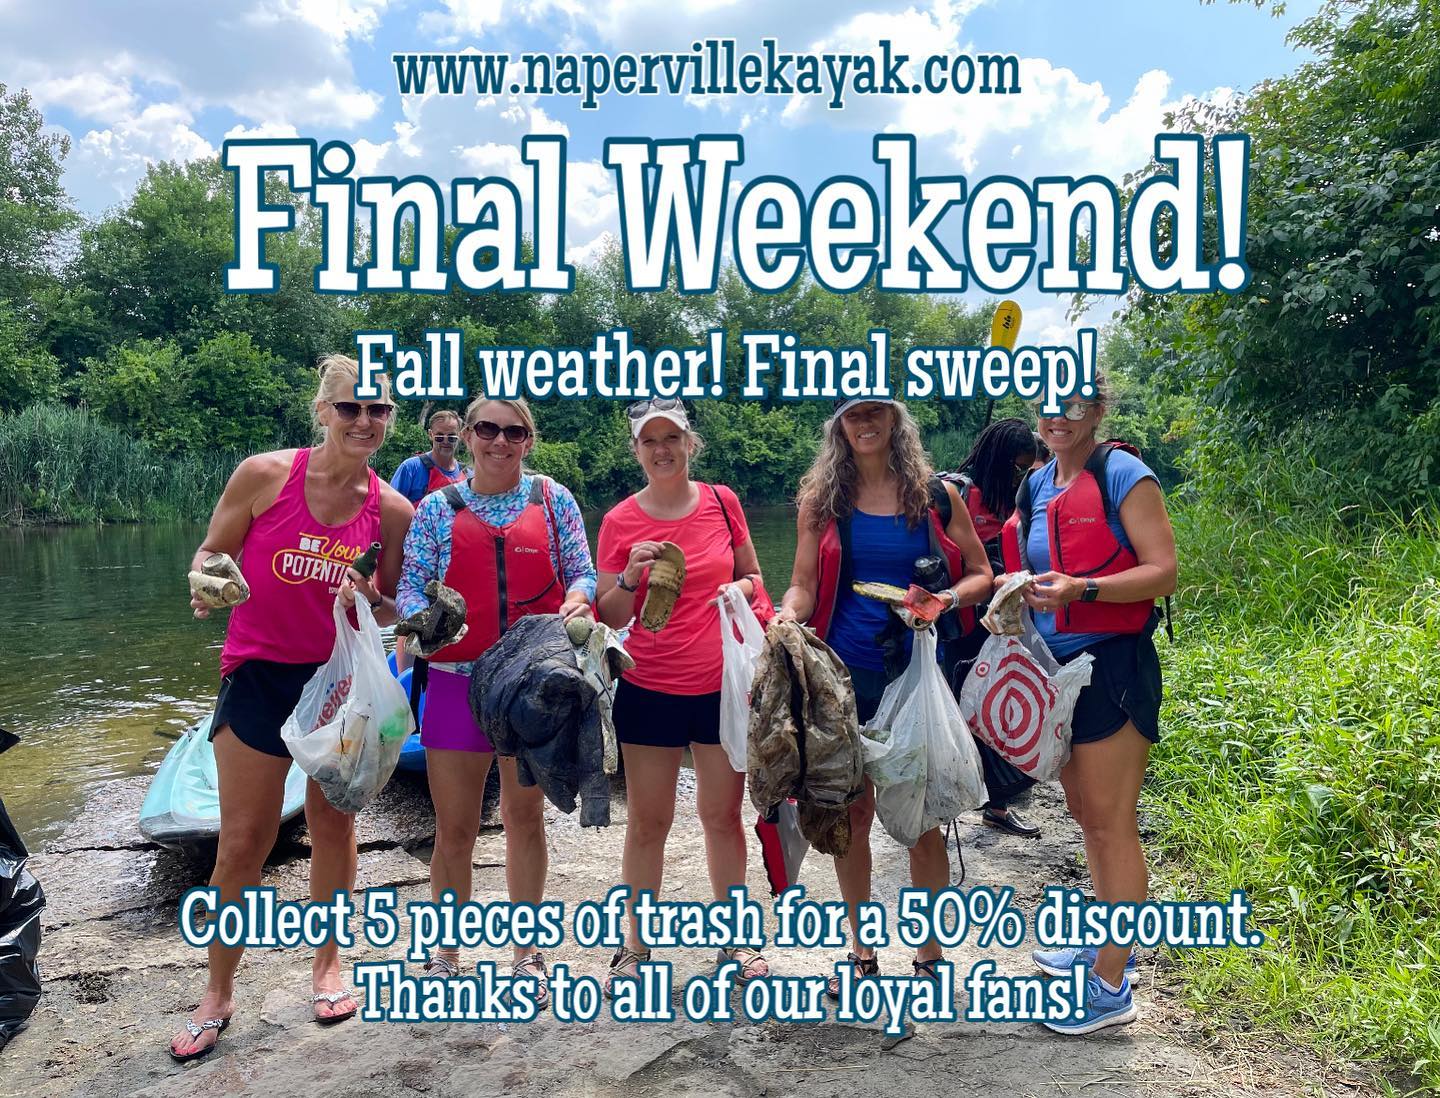 We are so lucky as a community to have the outdoor access, open spaces, rivers, and preserves that we have. 

This weekend is the last of our season and the only fall weekend we are open.  To celebrate we are going to offer 50% discount to every customer that picks up five pieces of trash while out enjoying the outdoors with us. 

Simply register and pay online and at the end of your time on the water please show our team the trash you picked up and we will apply the discount. We know our customers are like us and want to leave the outdoors better than we found them.

Thank you to all our loyal fans and customers for a great season! We hope to see you out there!

#napervillekayak #naperville #napervilleillinois #napervillebusinessnetwork